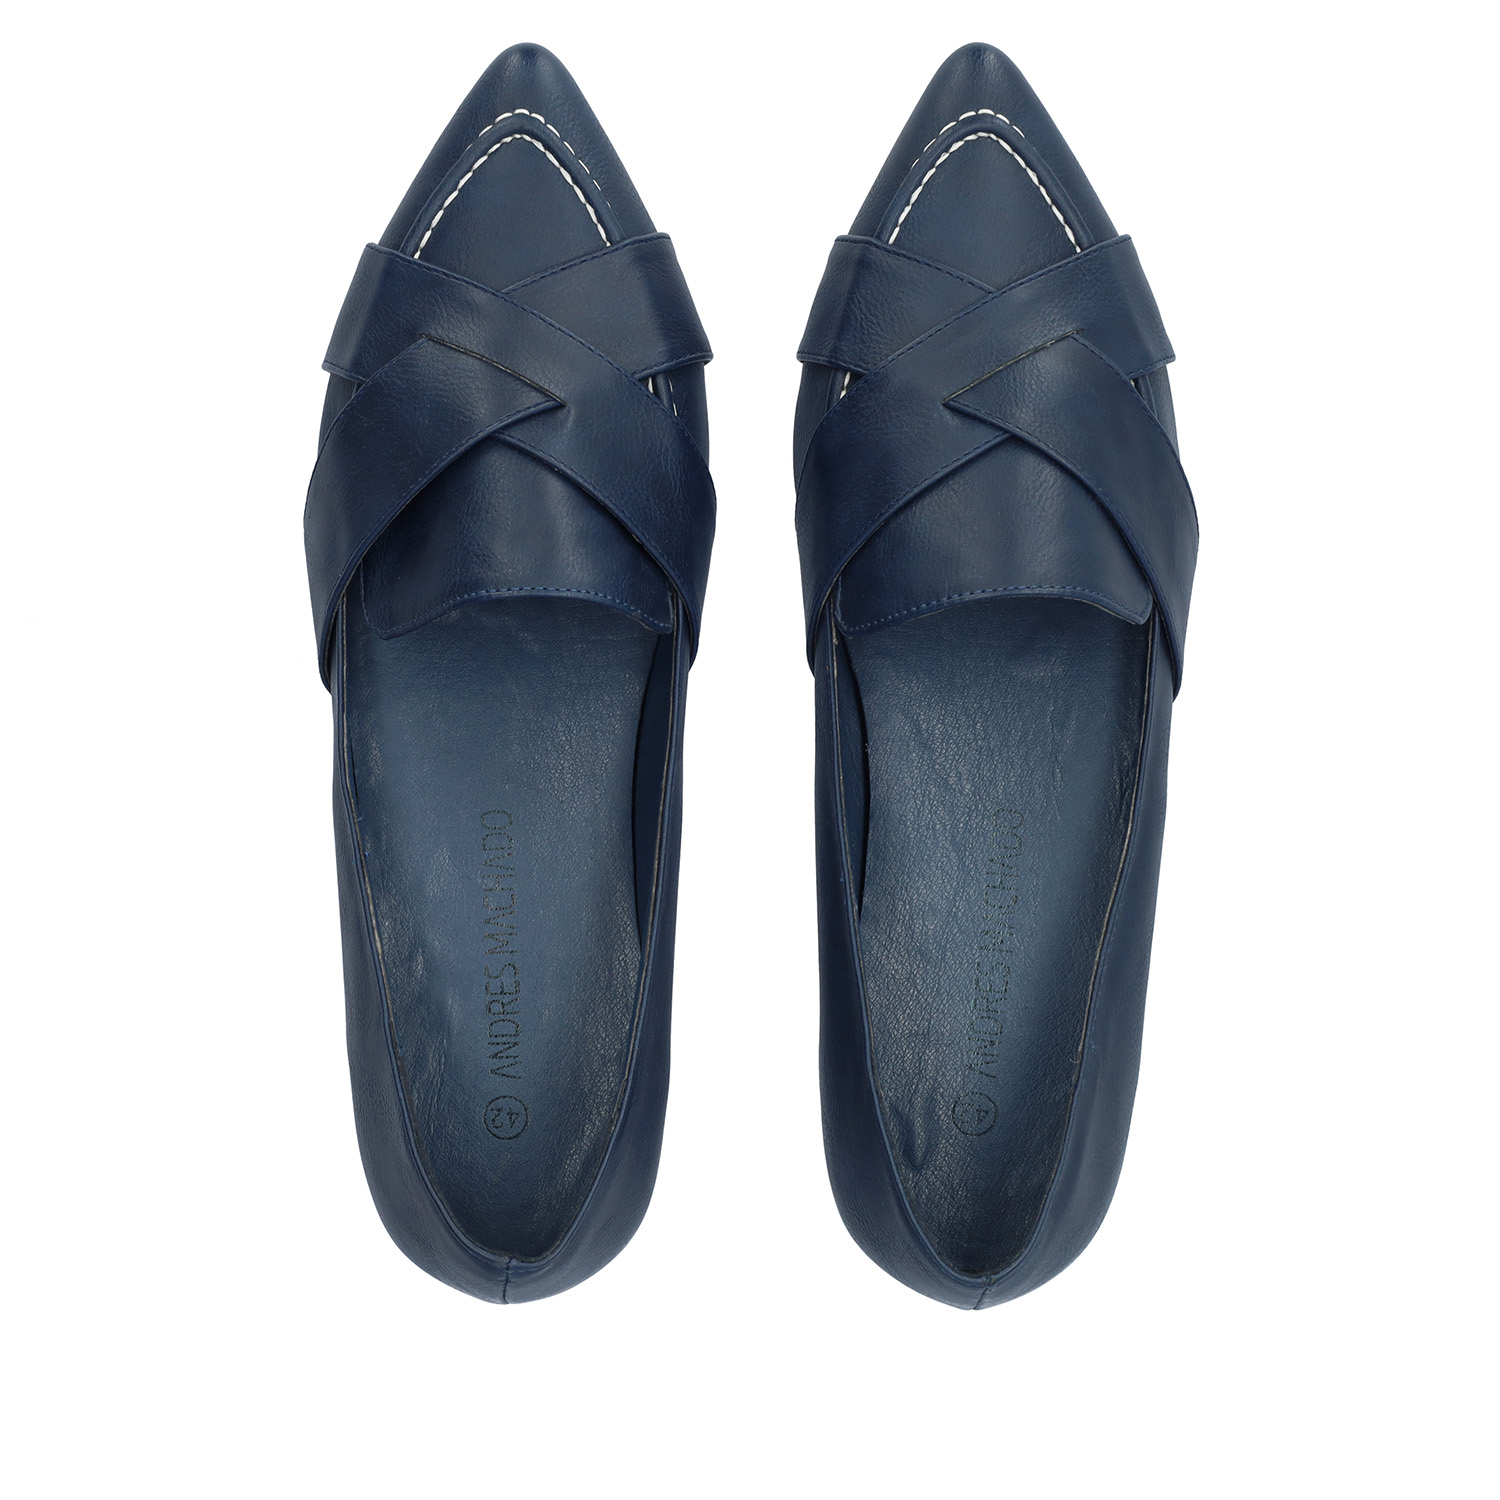 Pointed toe loafers in navy faux leather 